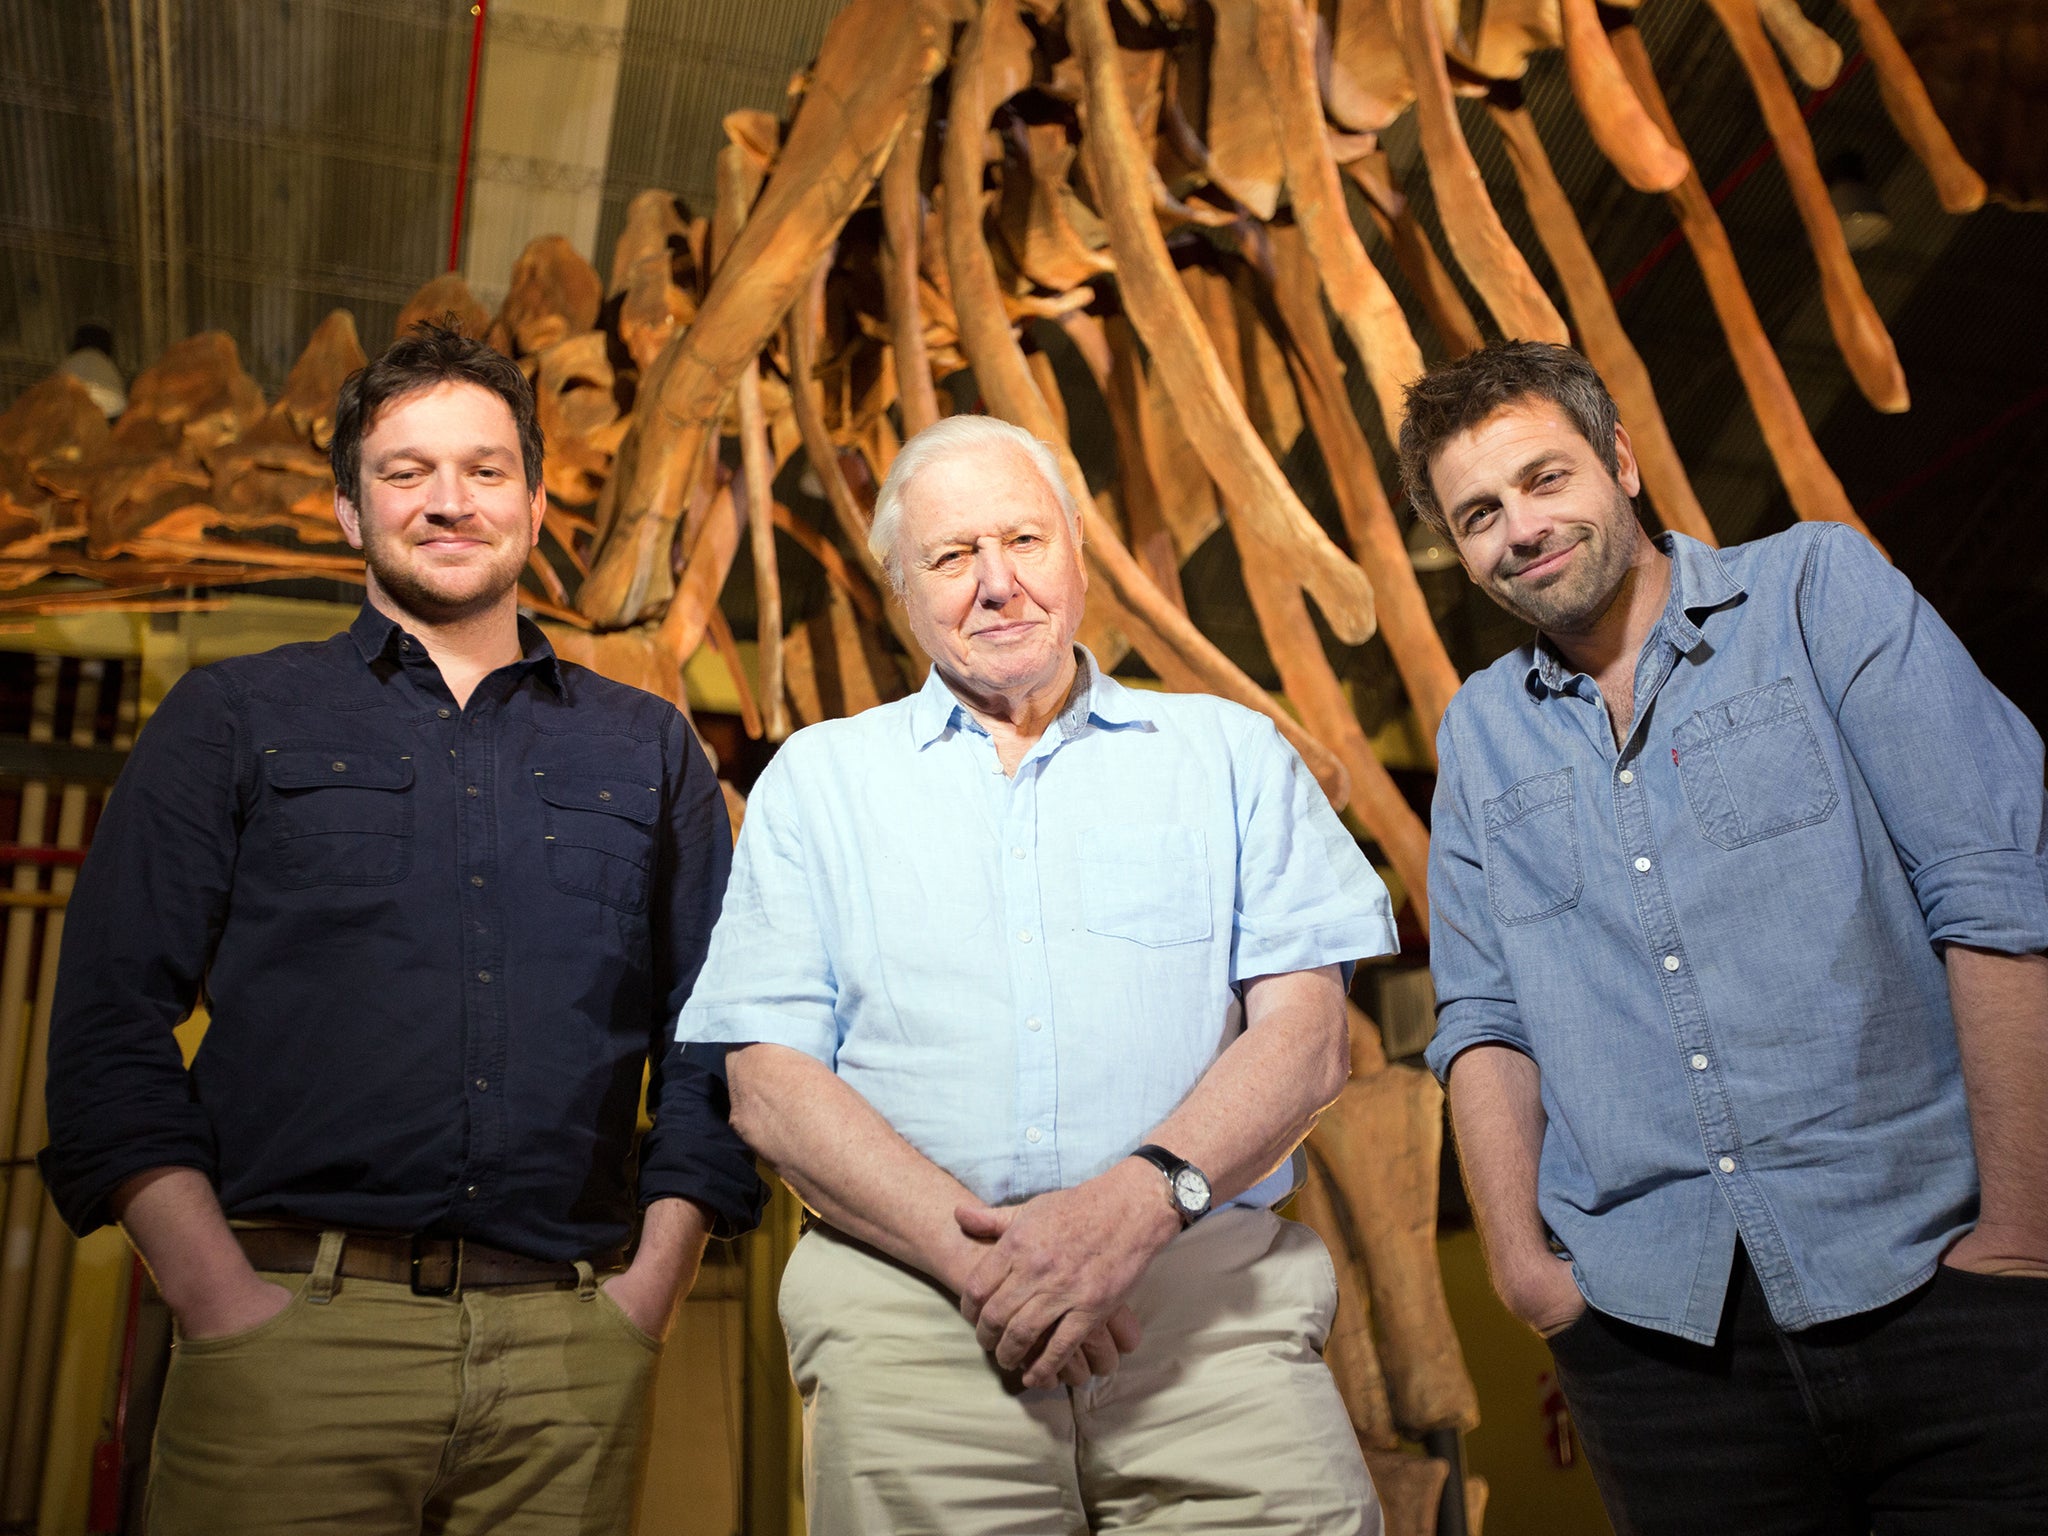 Ben Garrod, Sir David Attenborough and Dr Diego Pol with an amazing discovery